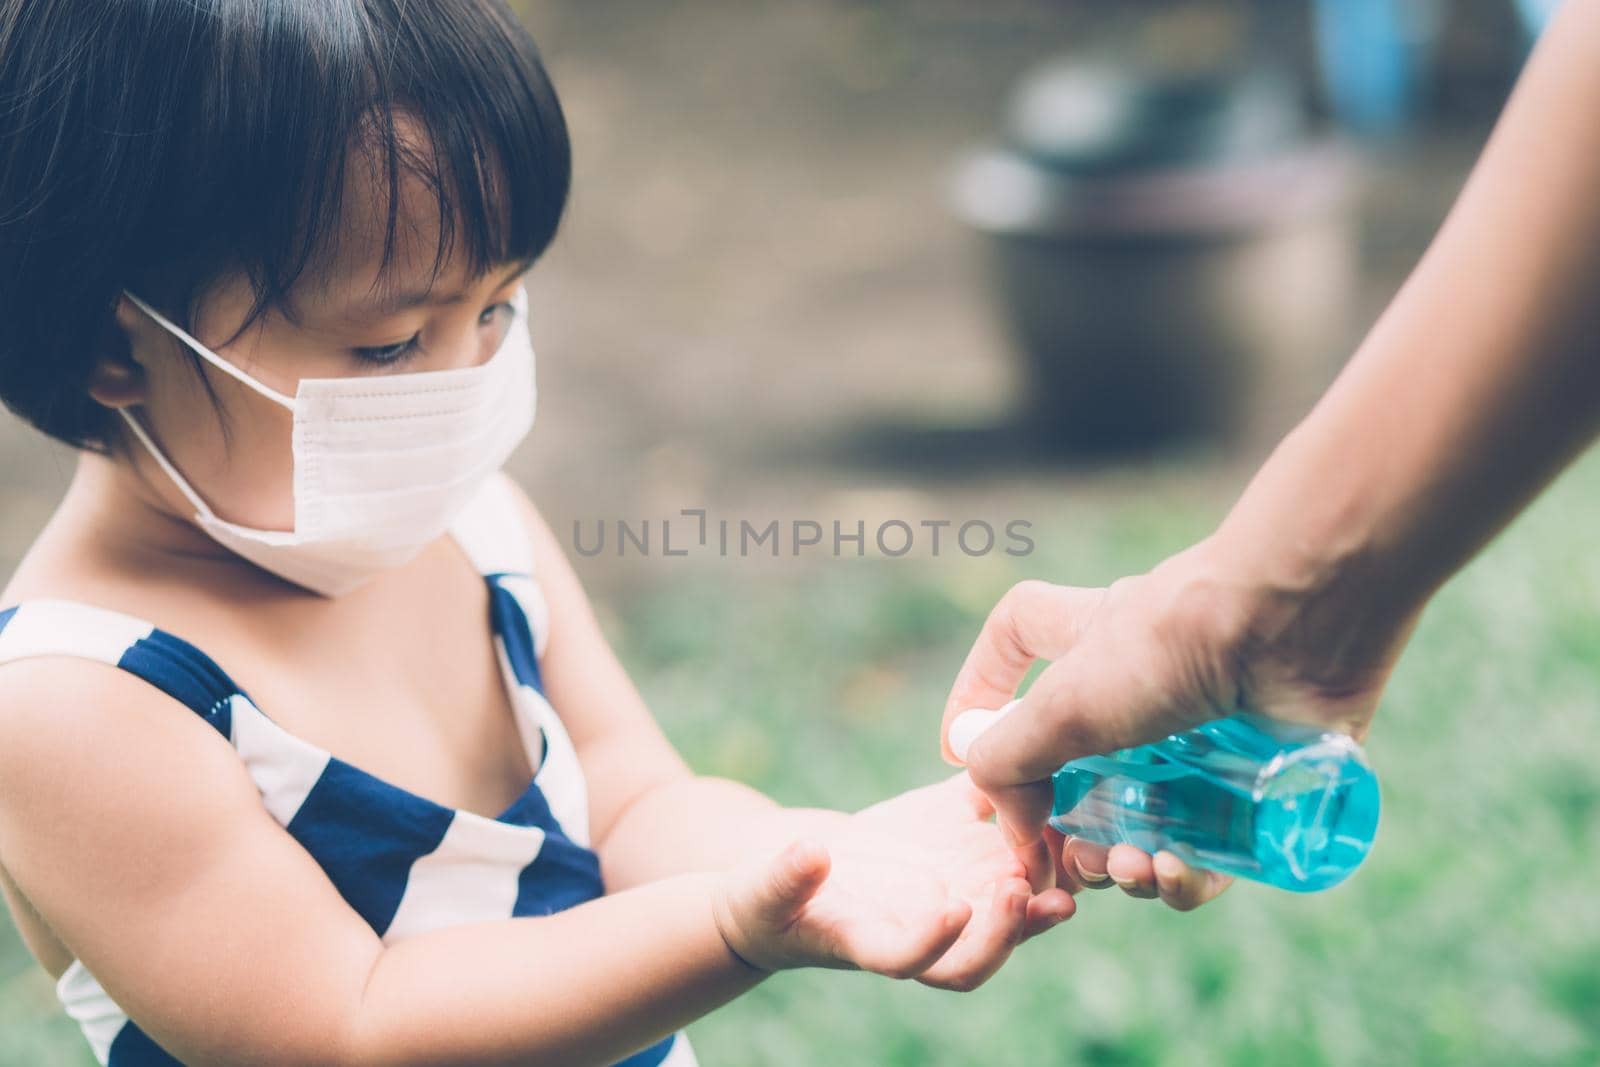 Mother take care son with face mask and sanitizer for protection disease flu or covid-19 outdoors, mom and child wearing medical mask clean hand for safety for outbreak of pandemic in public.